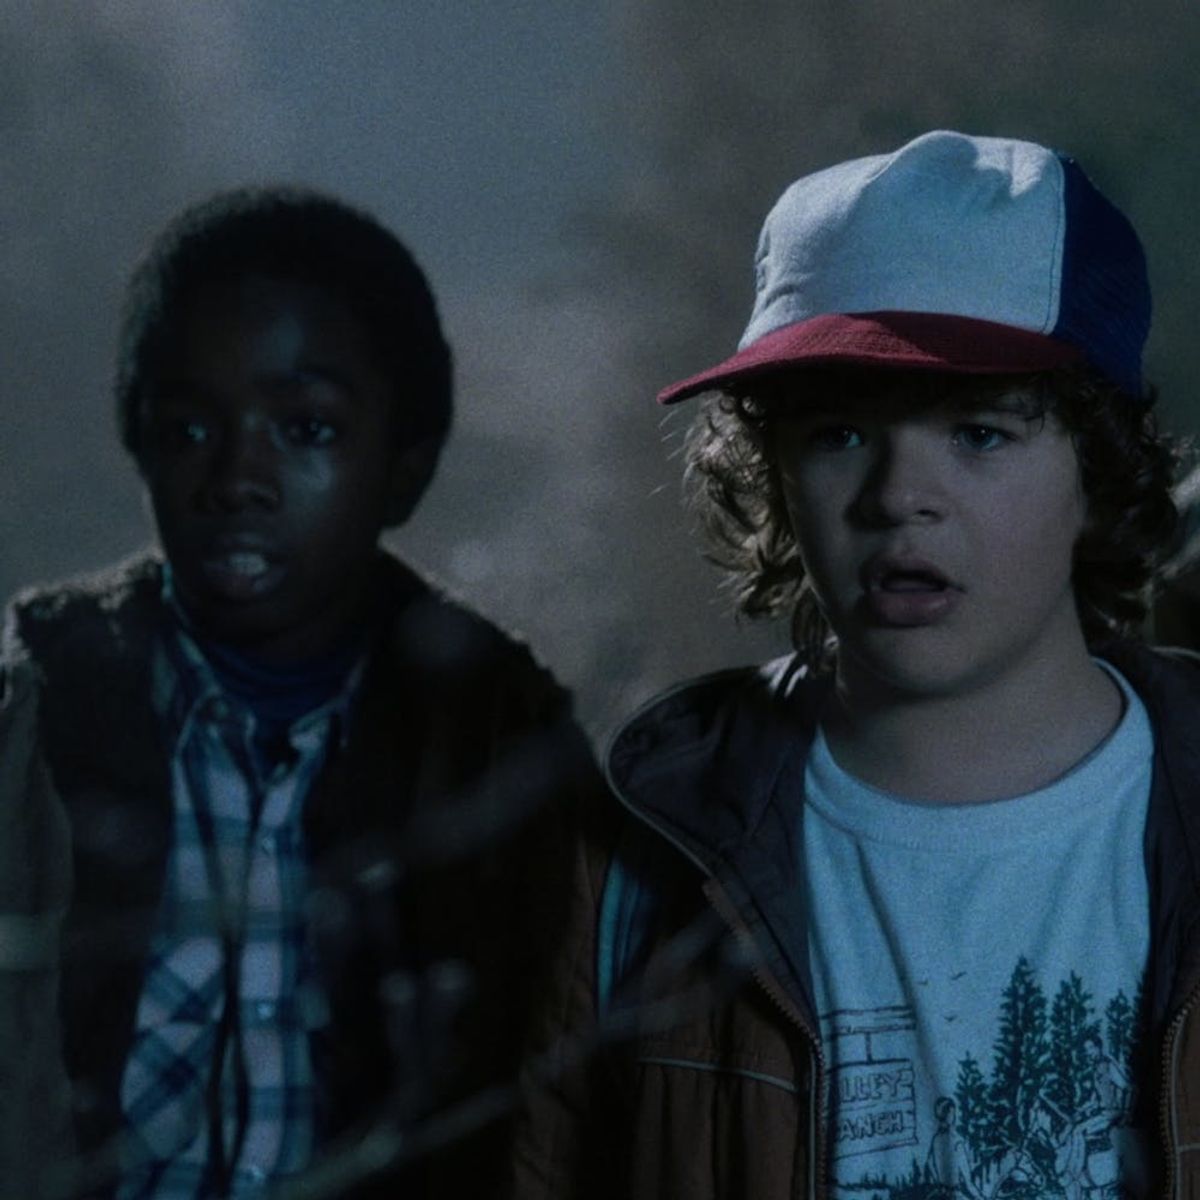 ‘Stranger Things’ Gets Even Stranger With the Bad Lip Reading Treatment